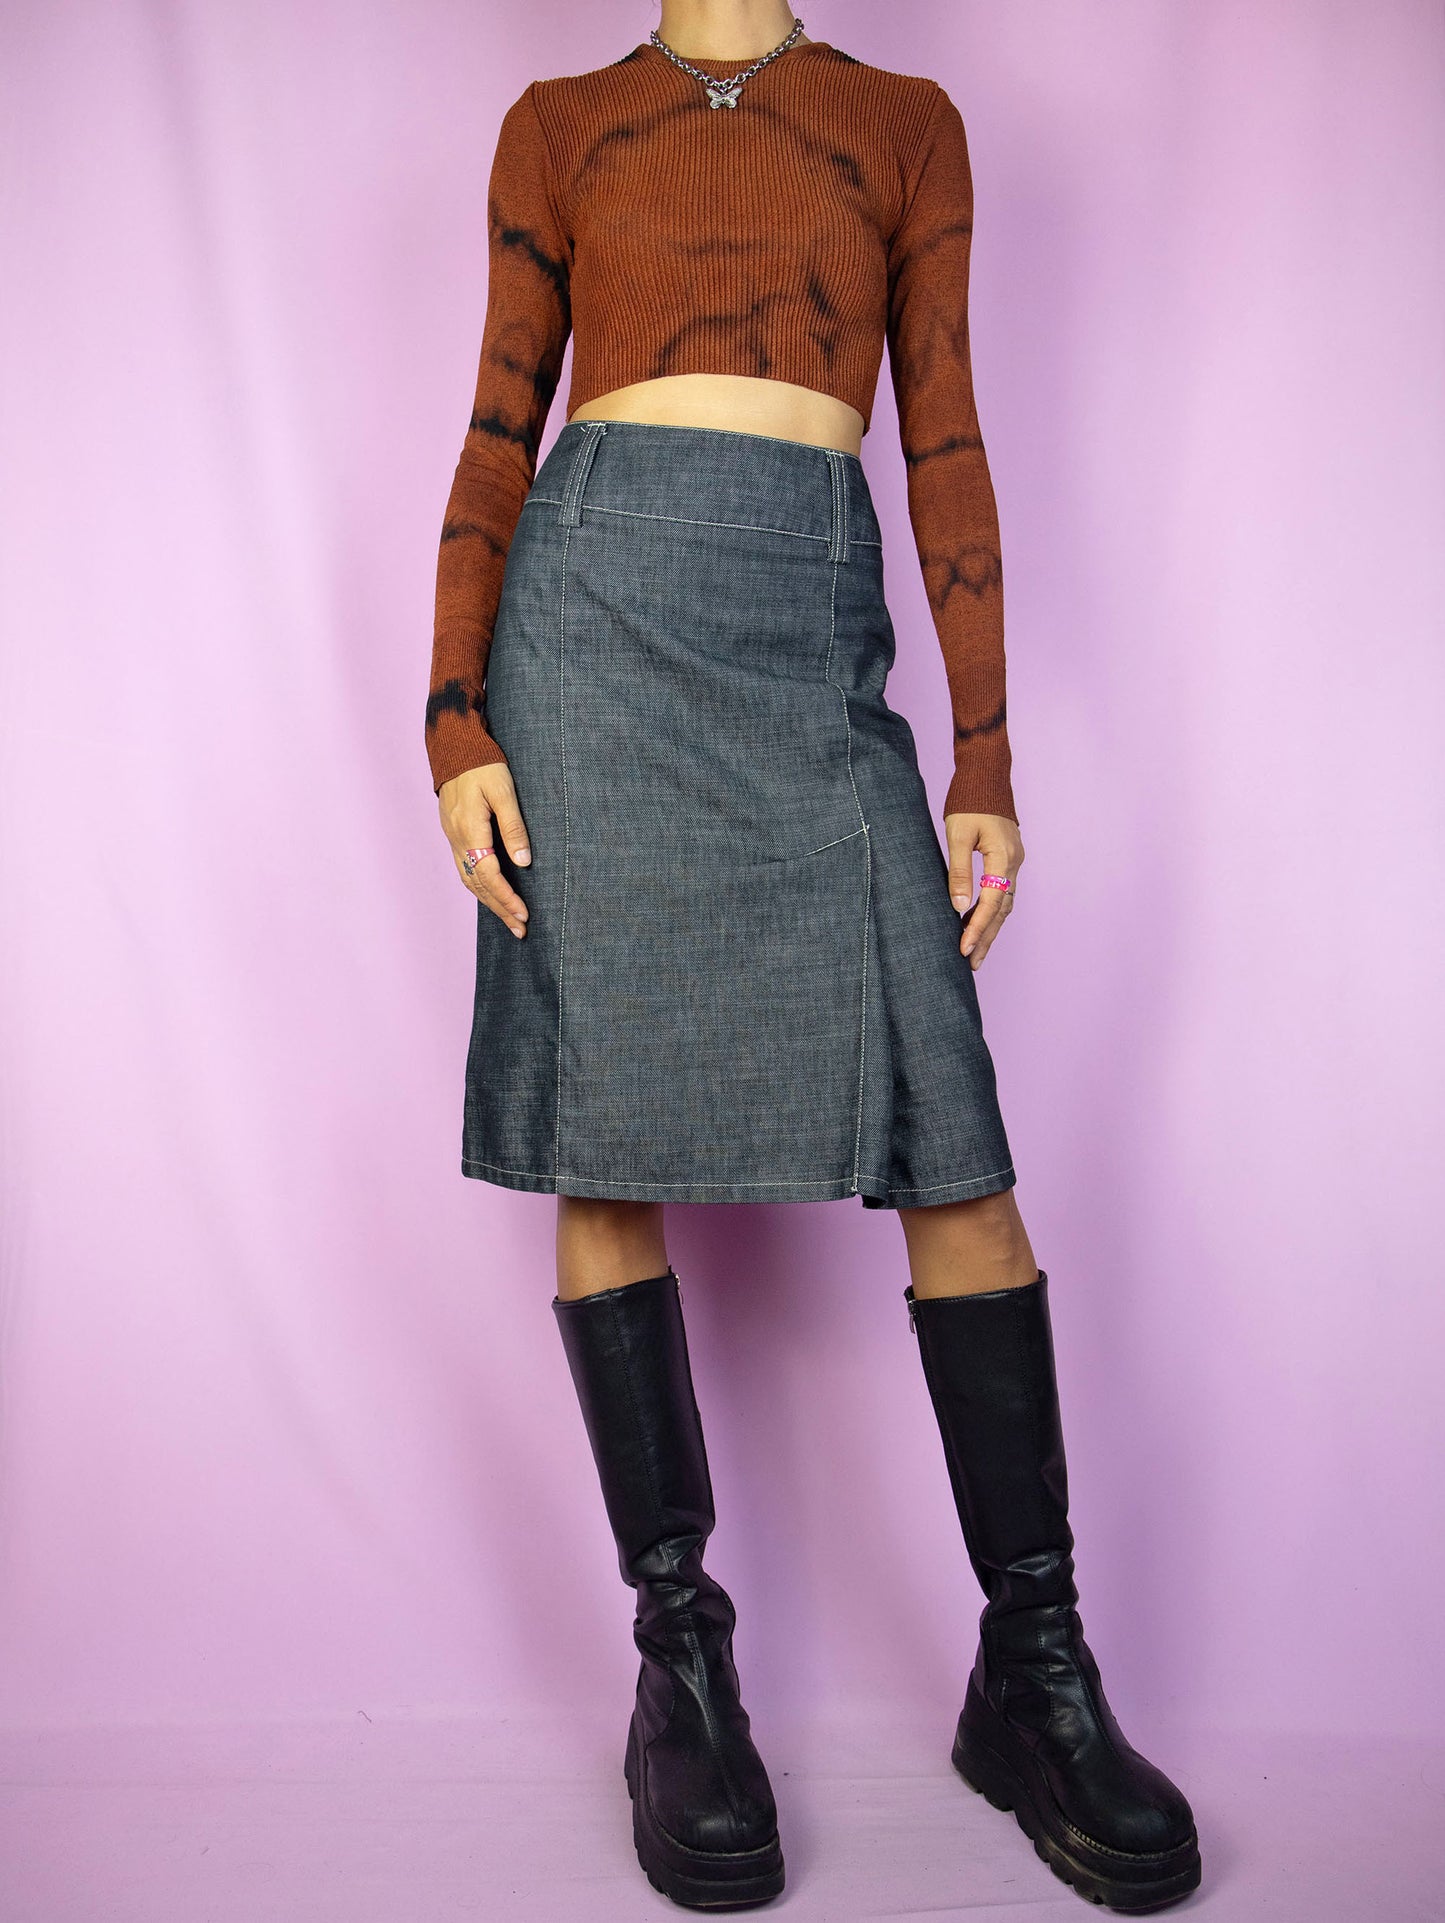 The Y2K Gray Denim Midi Skirt is a vintage skirt with a back zipper closure and front pleat detail. Cyber grunge 2000s subversive skirt.